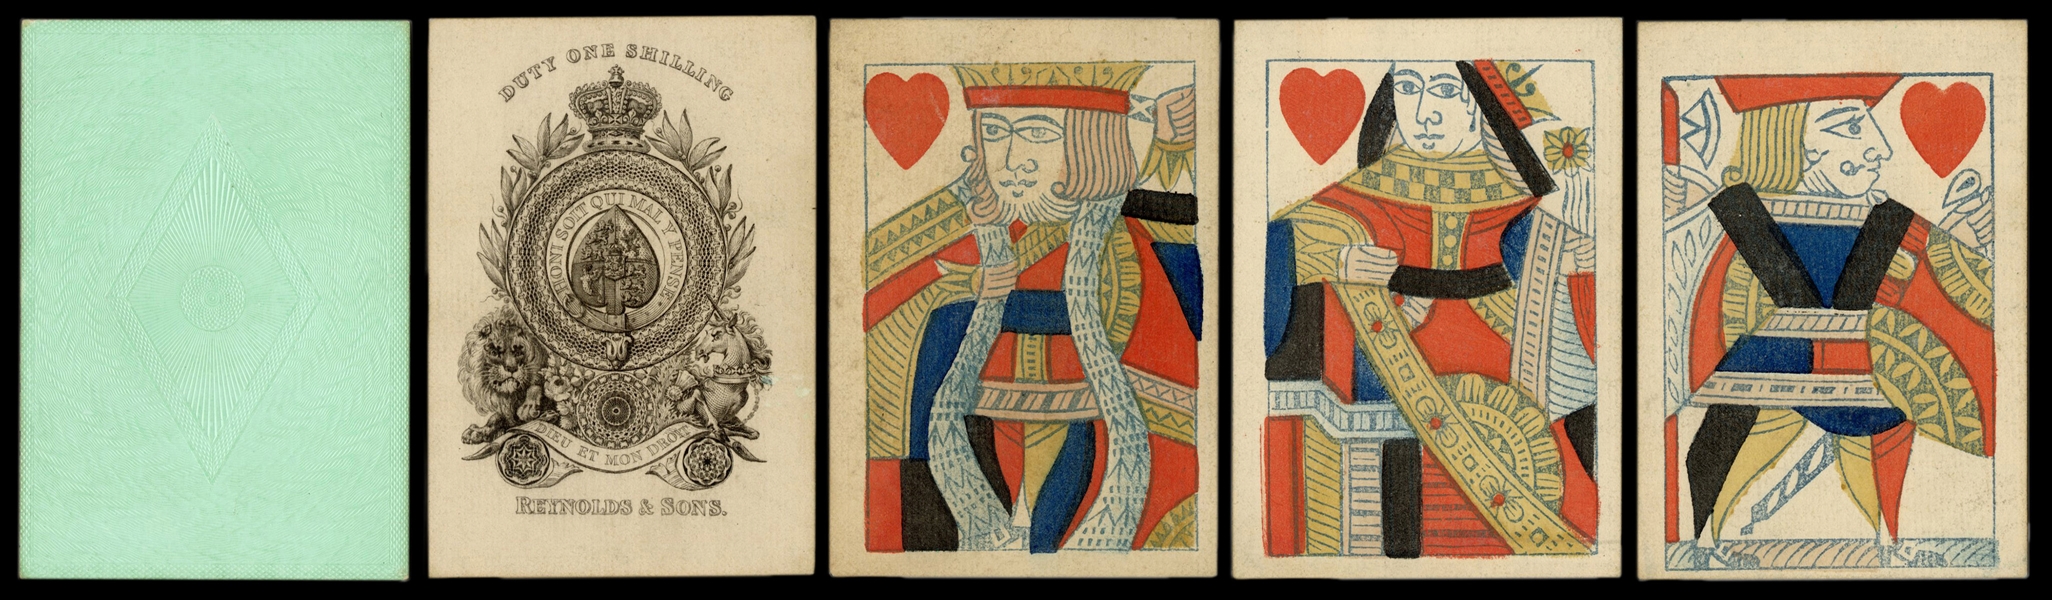  Reynolds & Sons Playing Cards. London, ca. 1860 [?]. 52 (co...